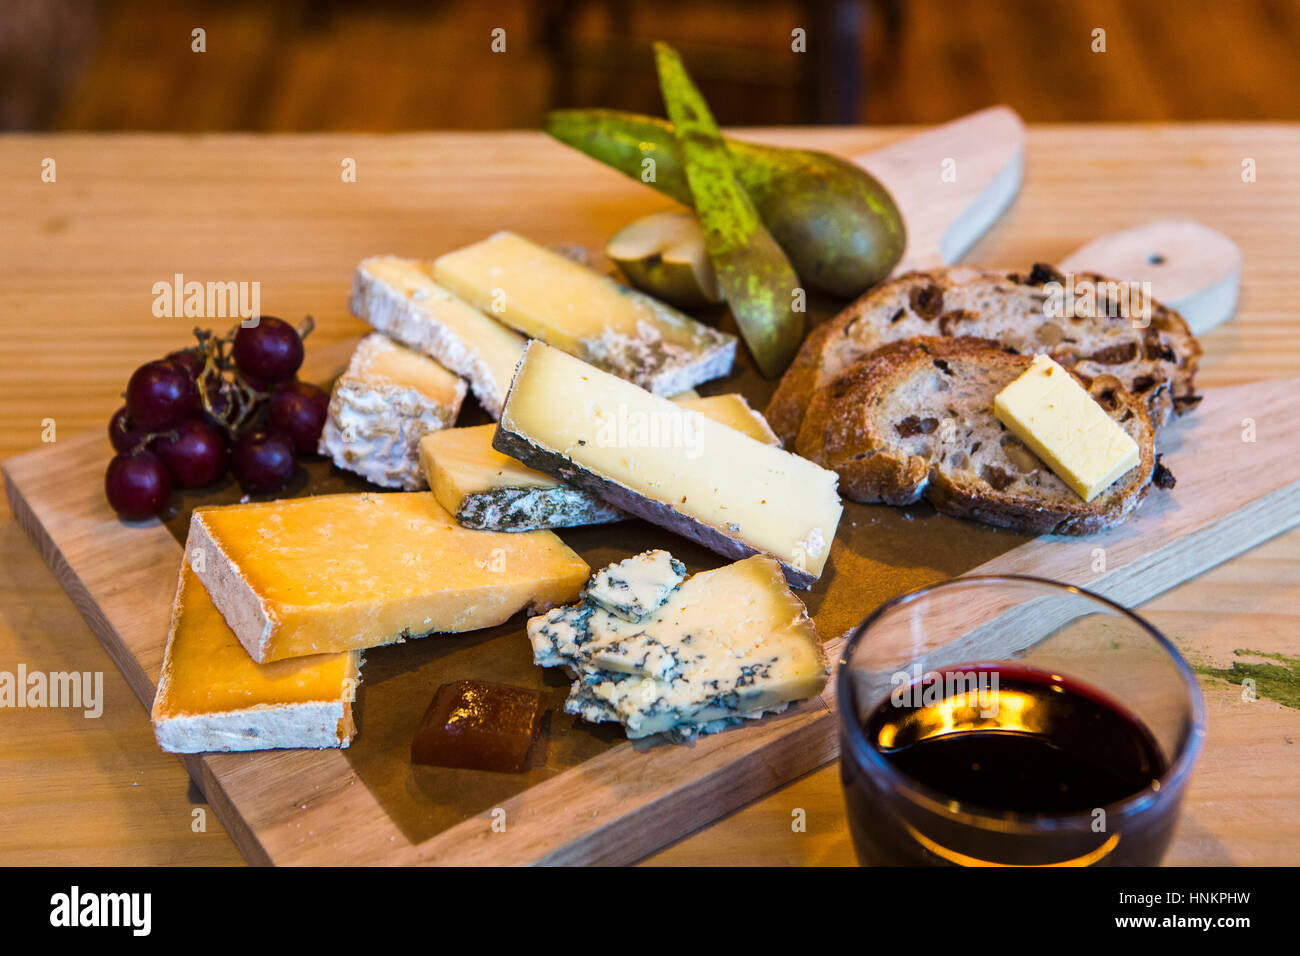 Deli cheese board selection on wooden board with red wine. Stock Photo